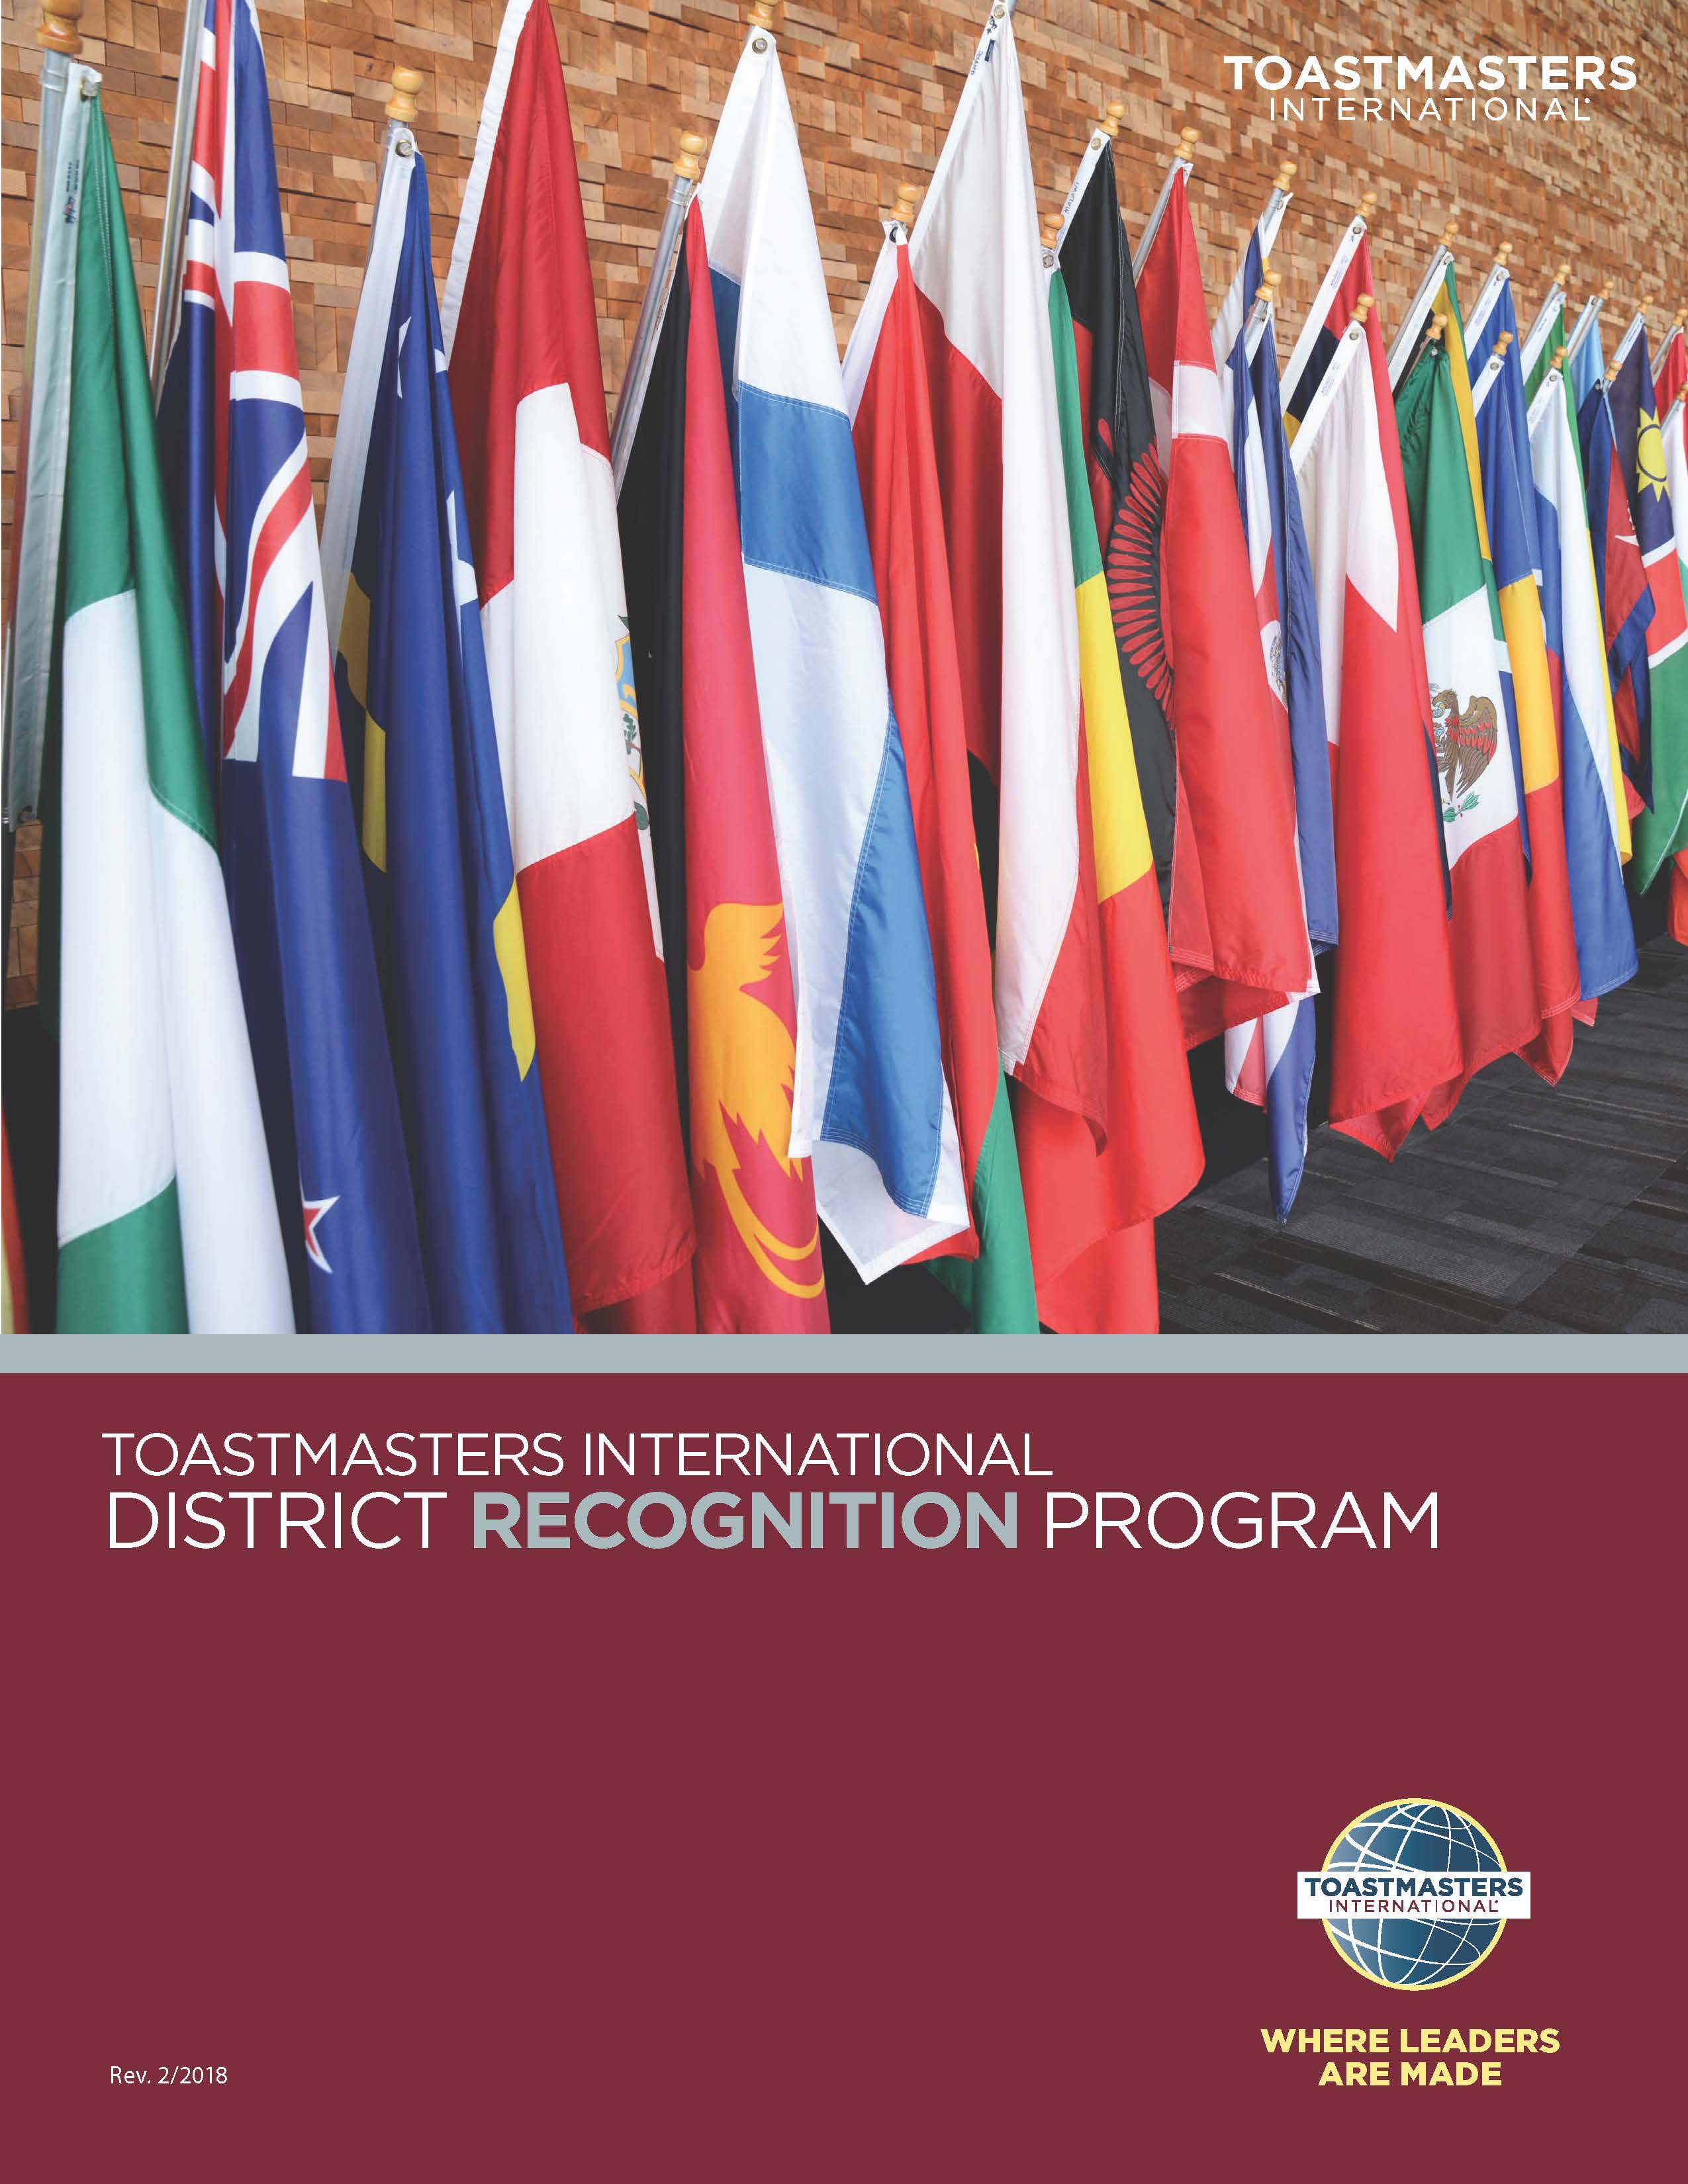 Toastmasters District Recognition Program